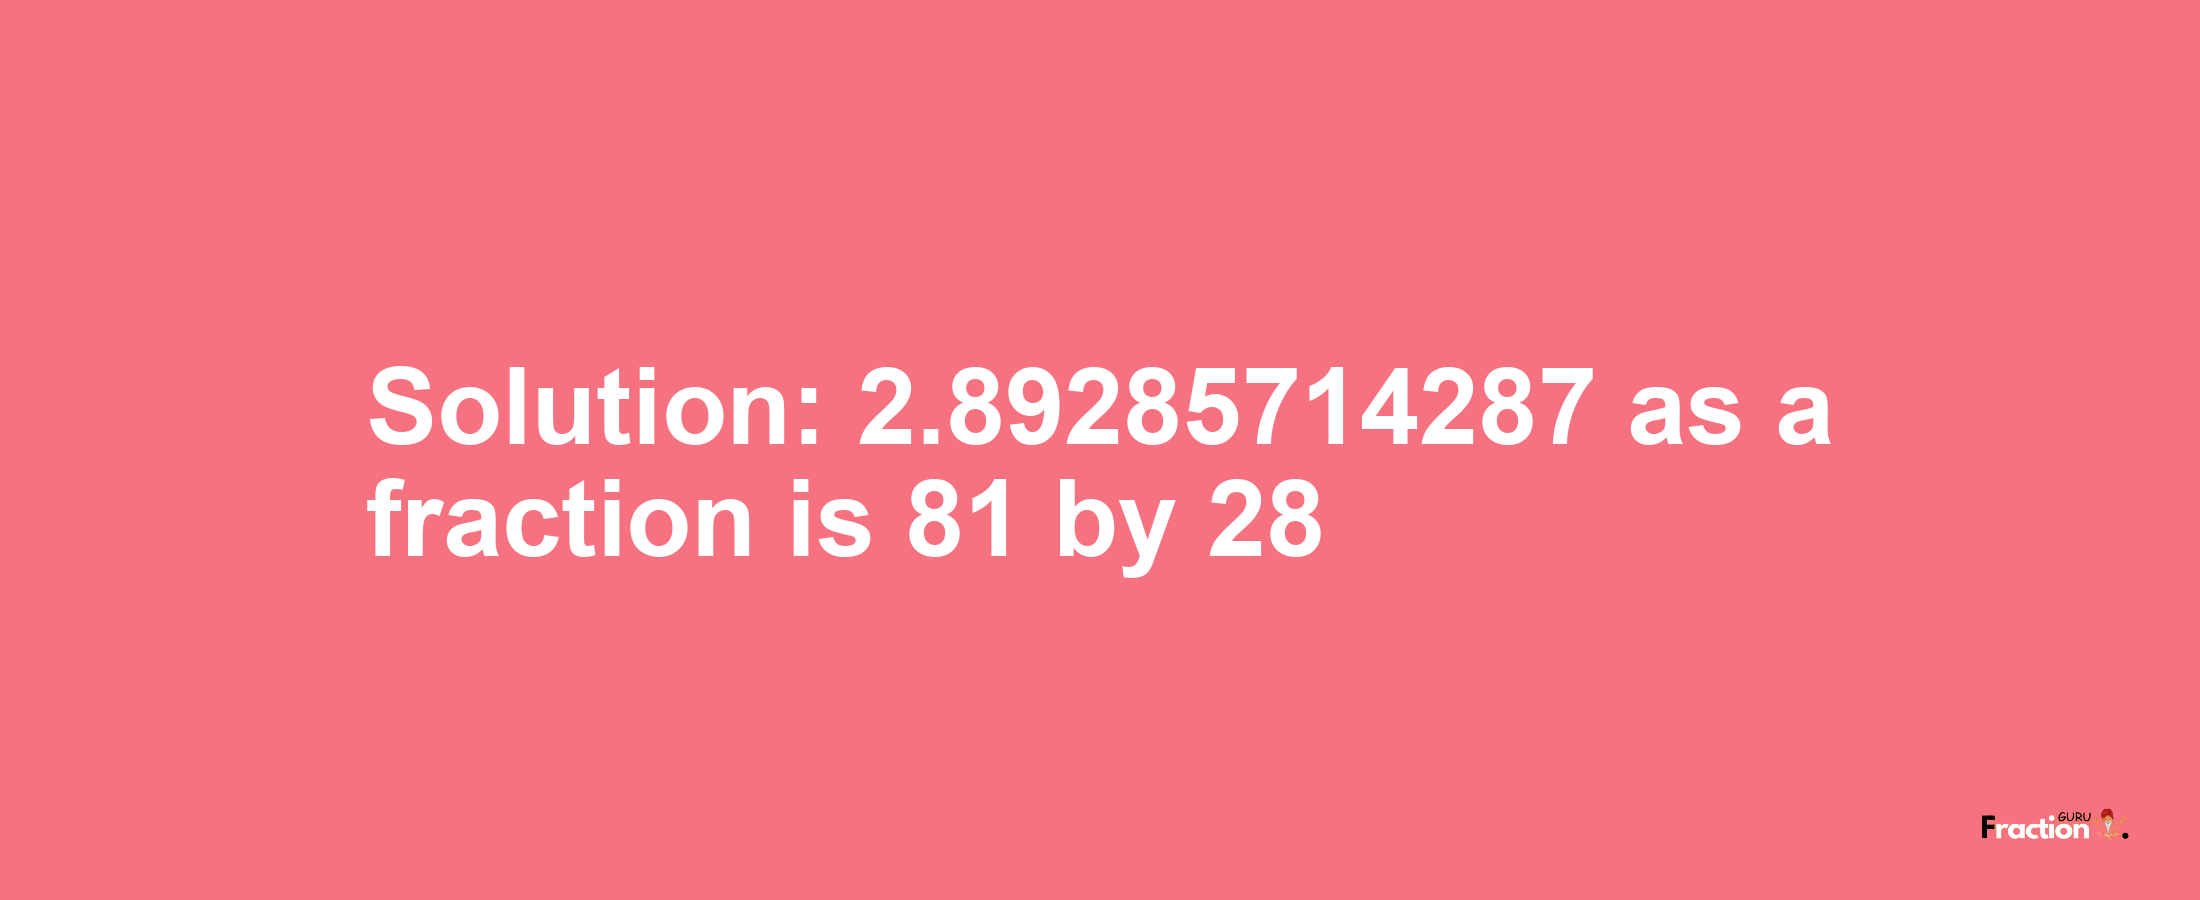 Solution:2.89285714287 as a fraction is 81/28